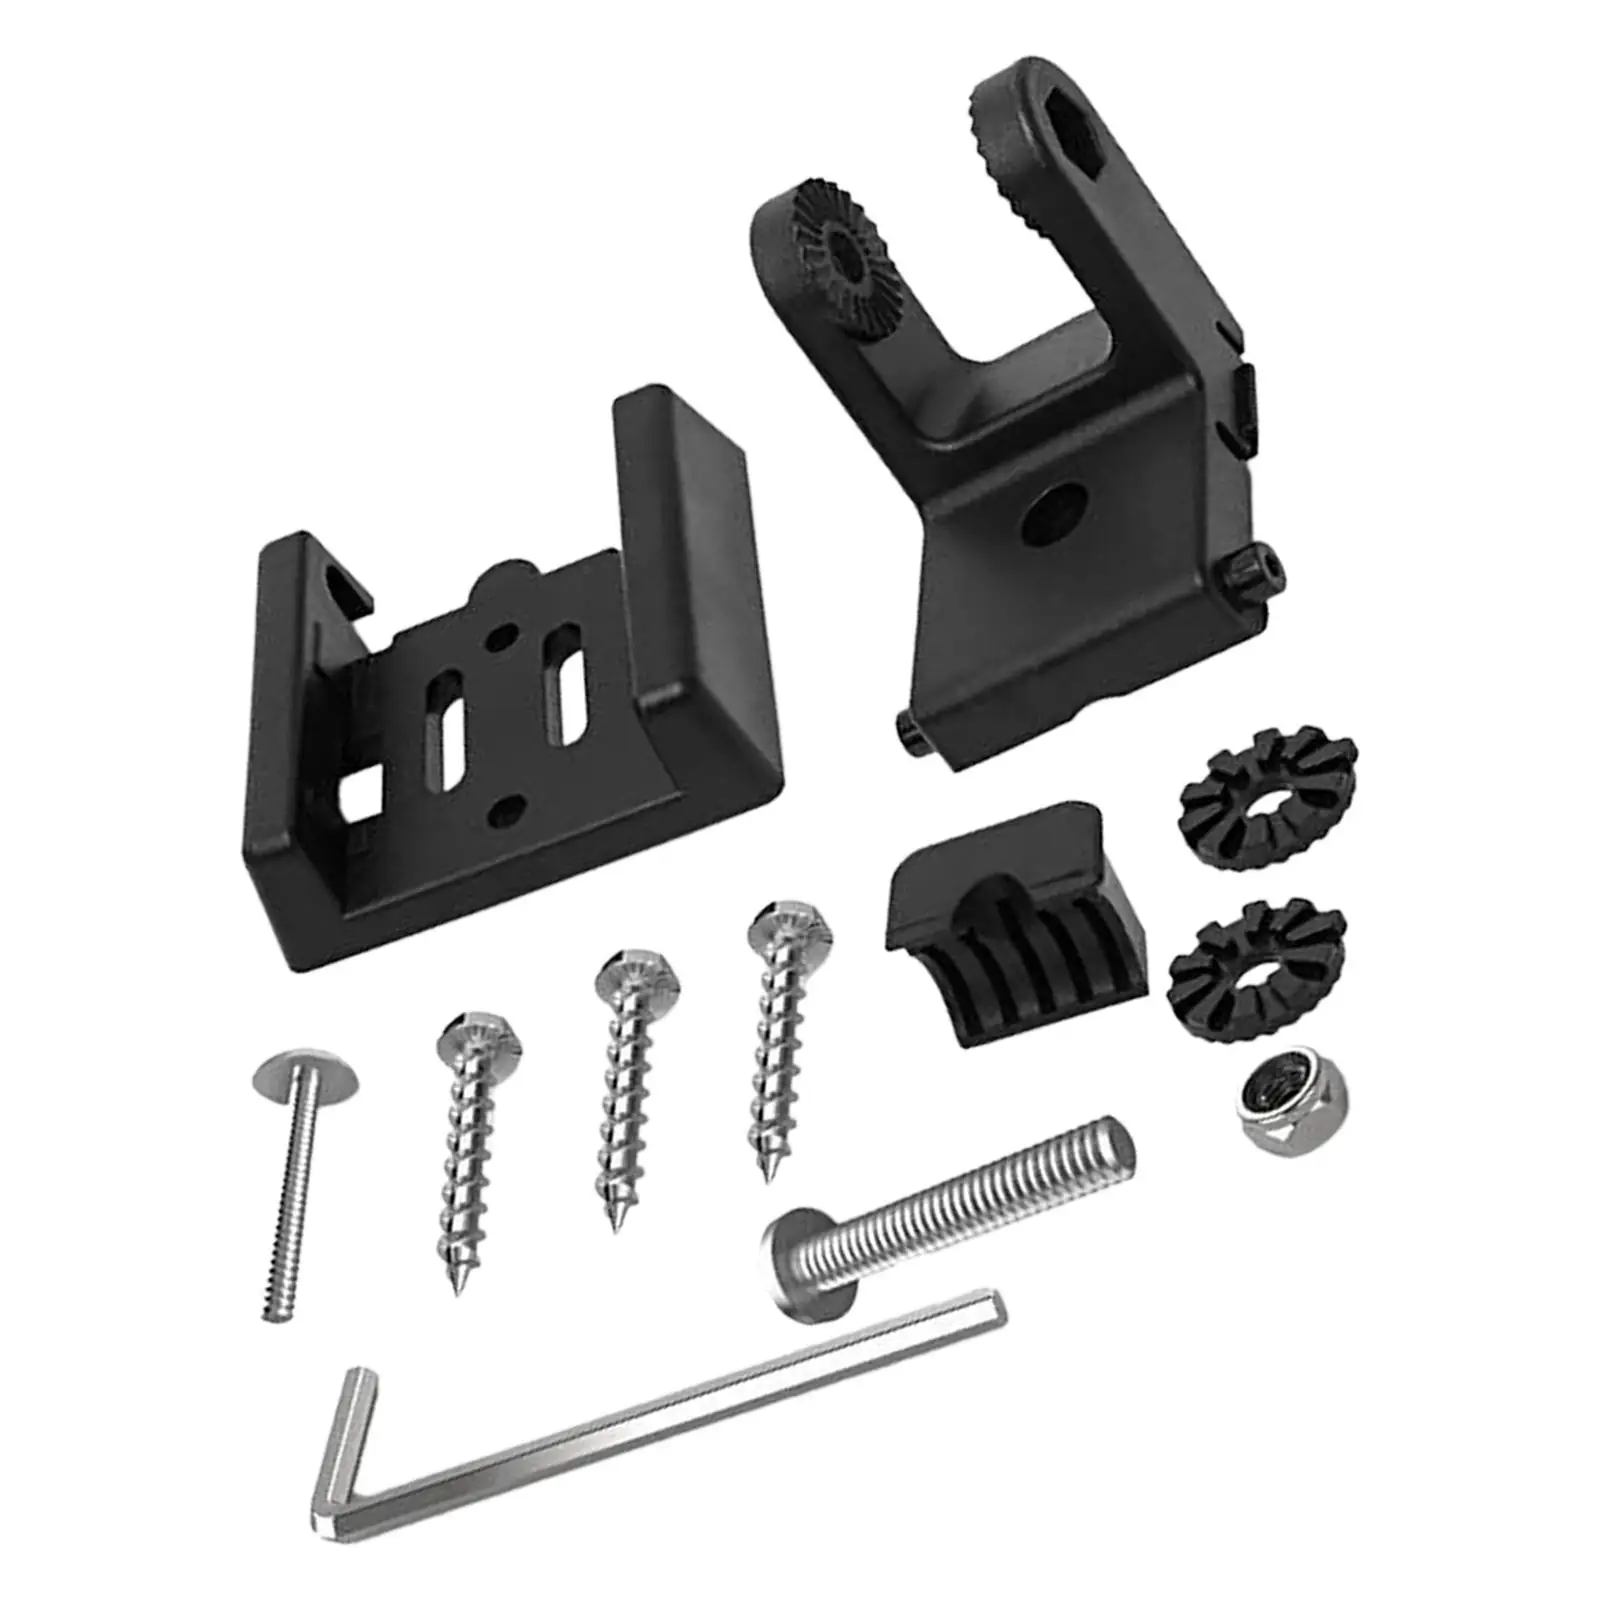 Transducer Bracket Replacement Transom Mounting Hardware Set Transducer Mount for XNT 920T 9HW T 14Di T 1474T 928T Durable